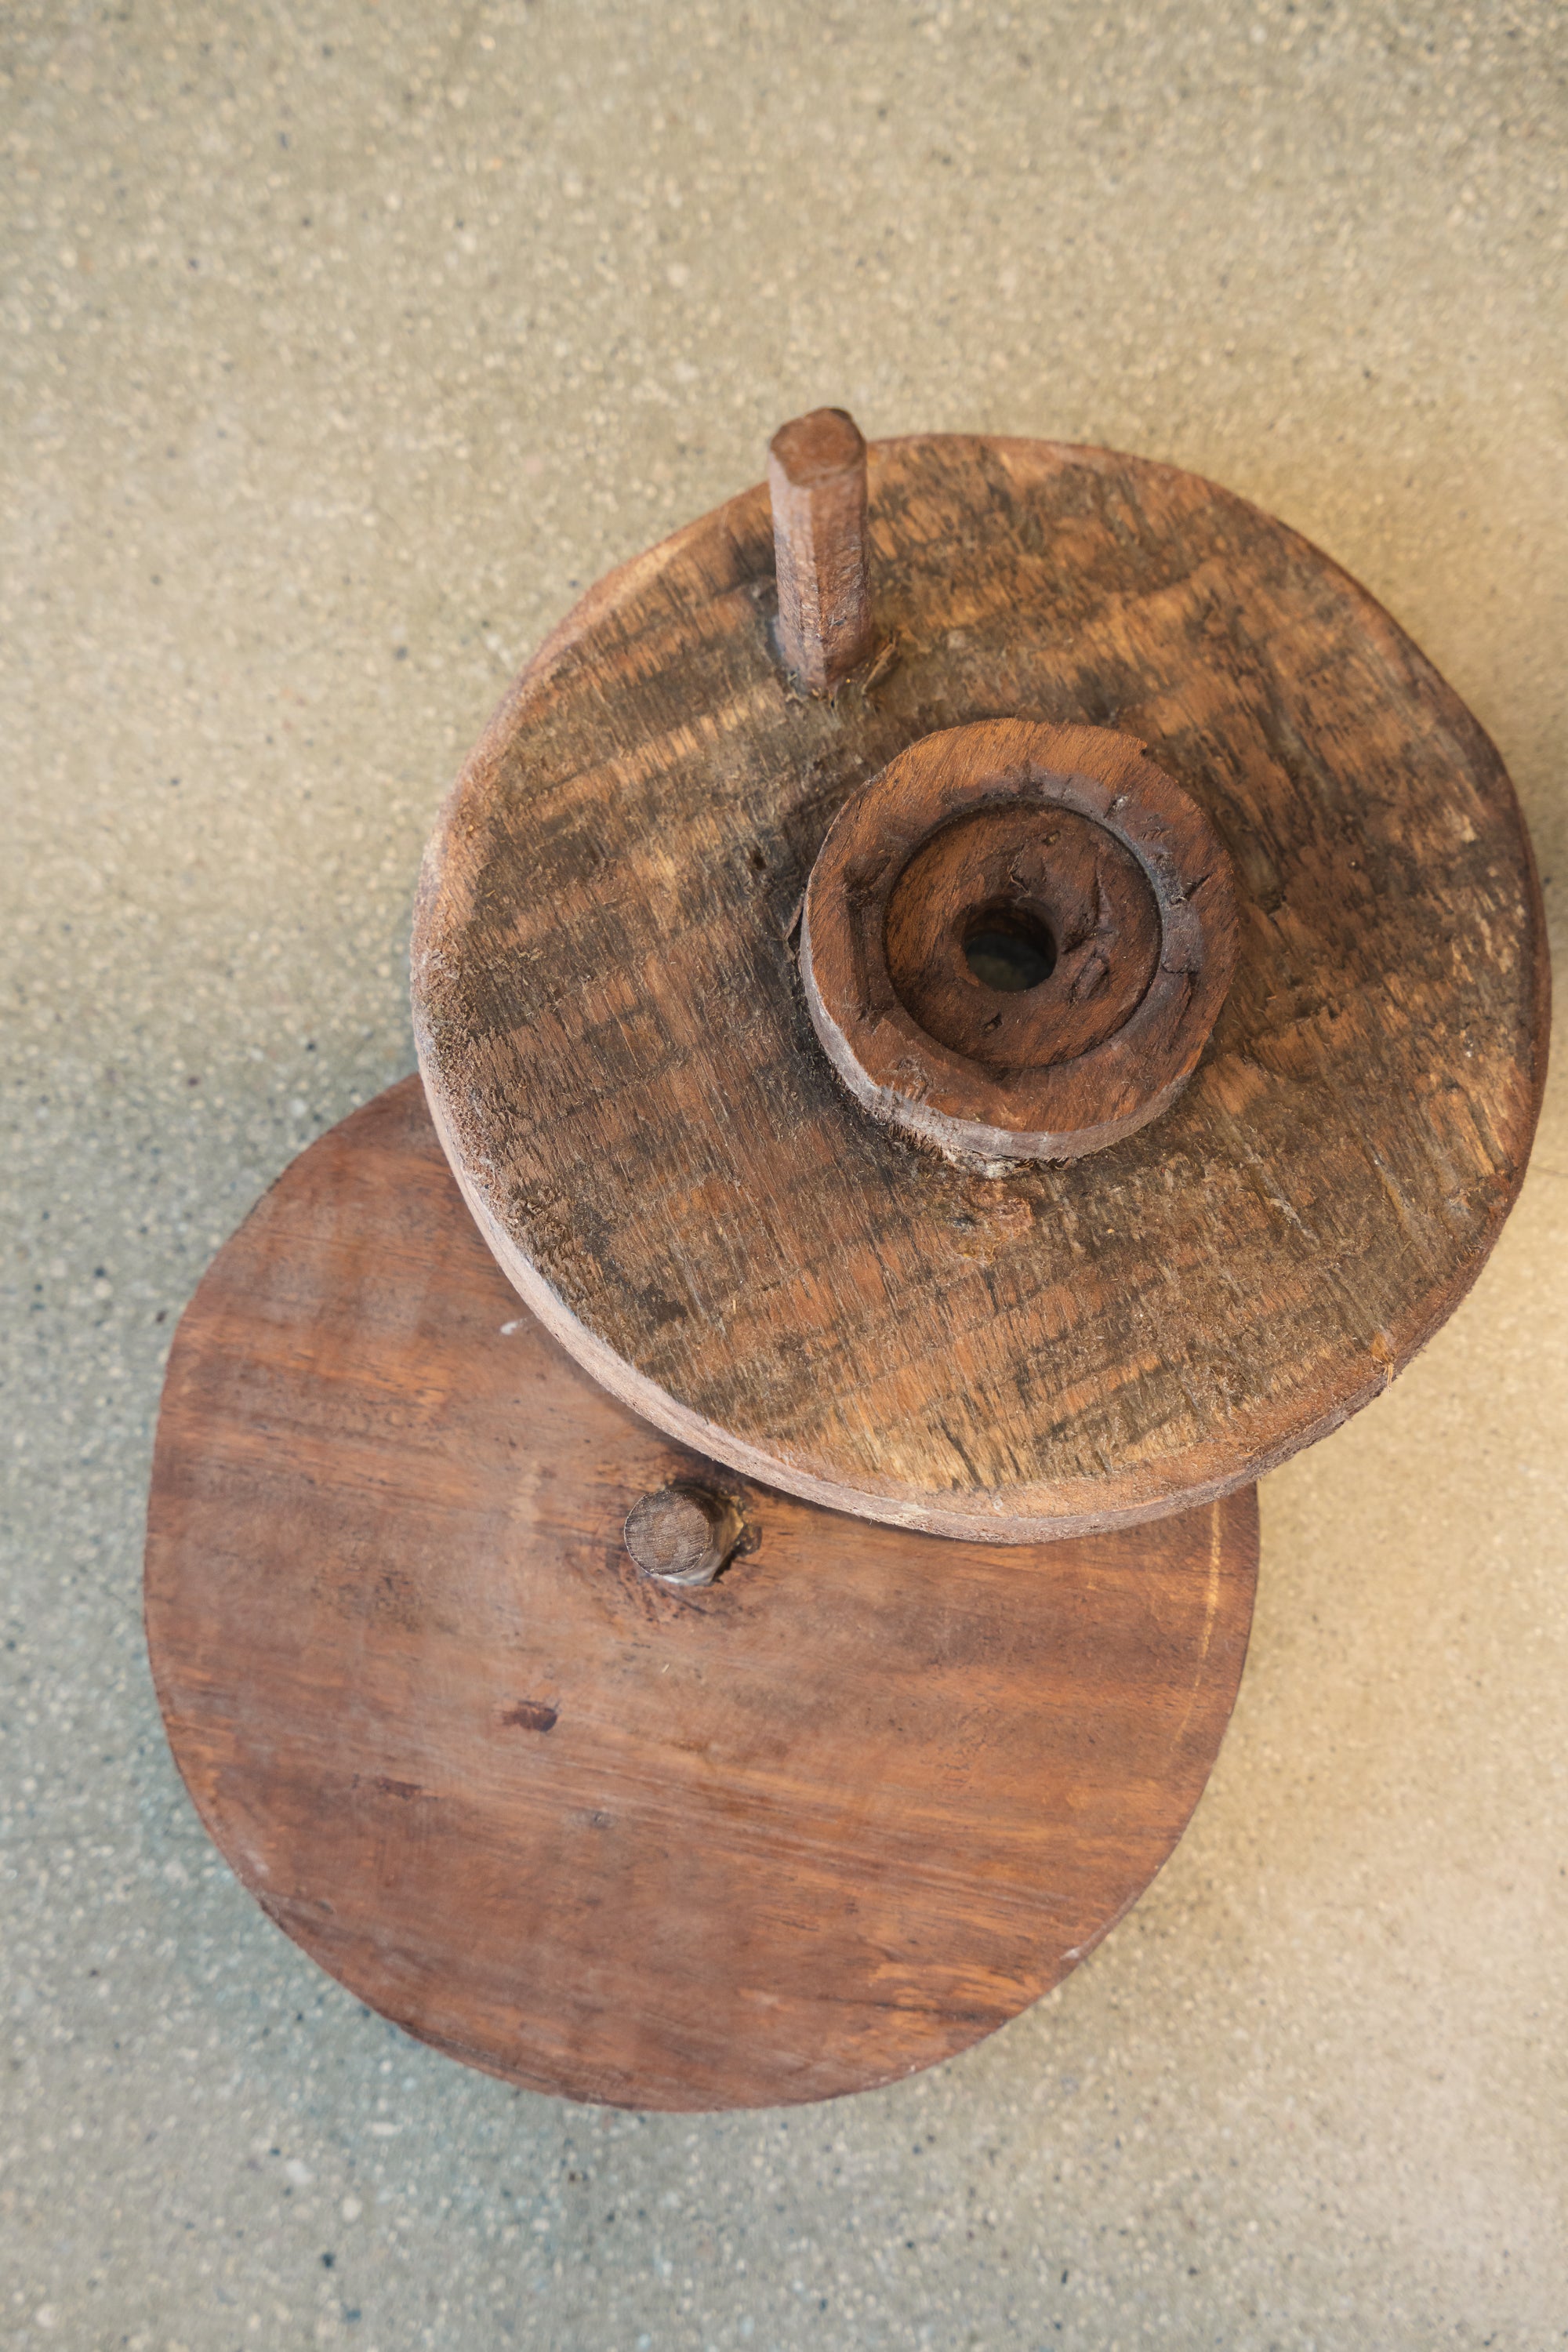 The Decorative Reclaimed Wood Spice Grinder